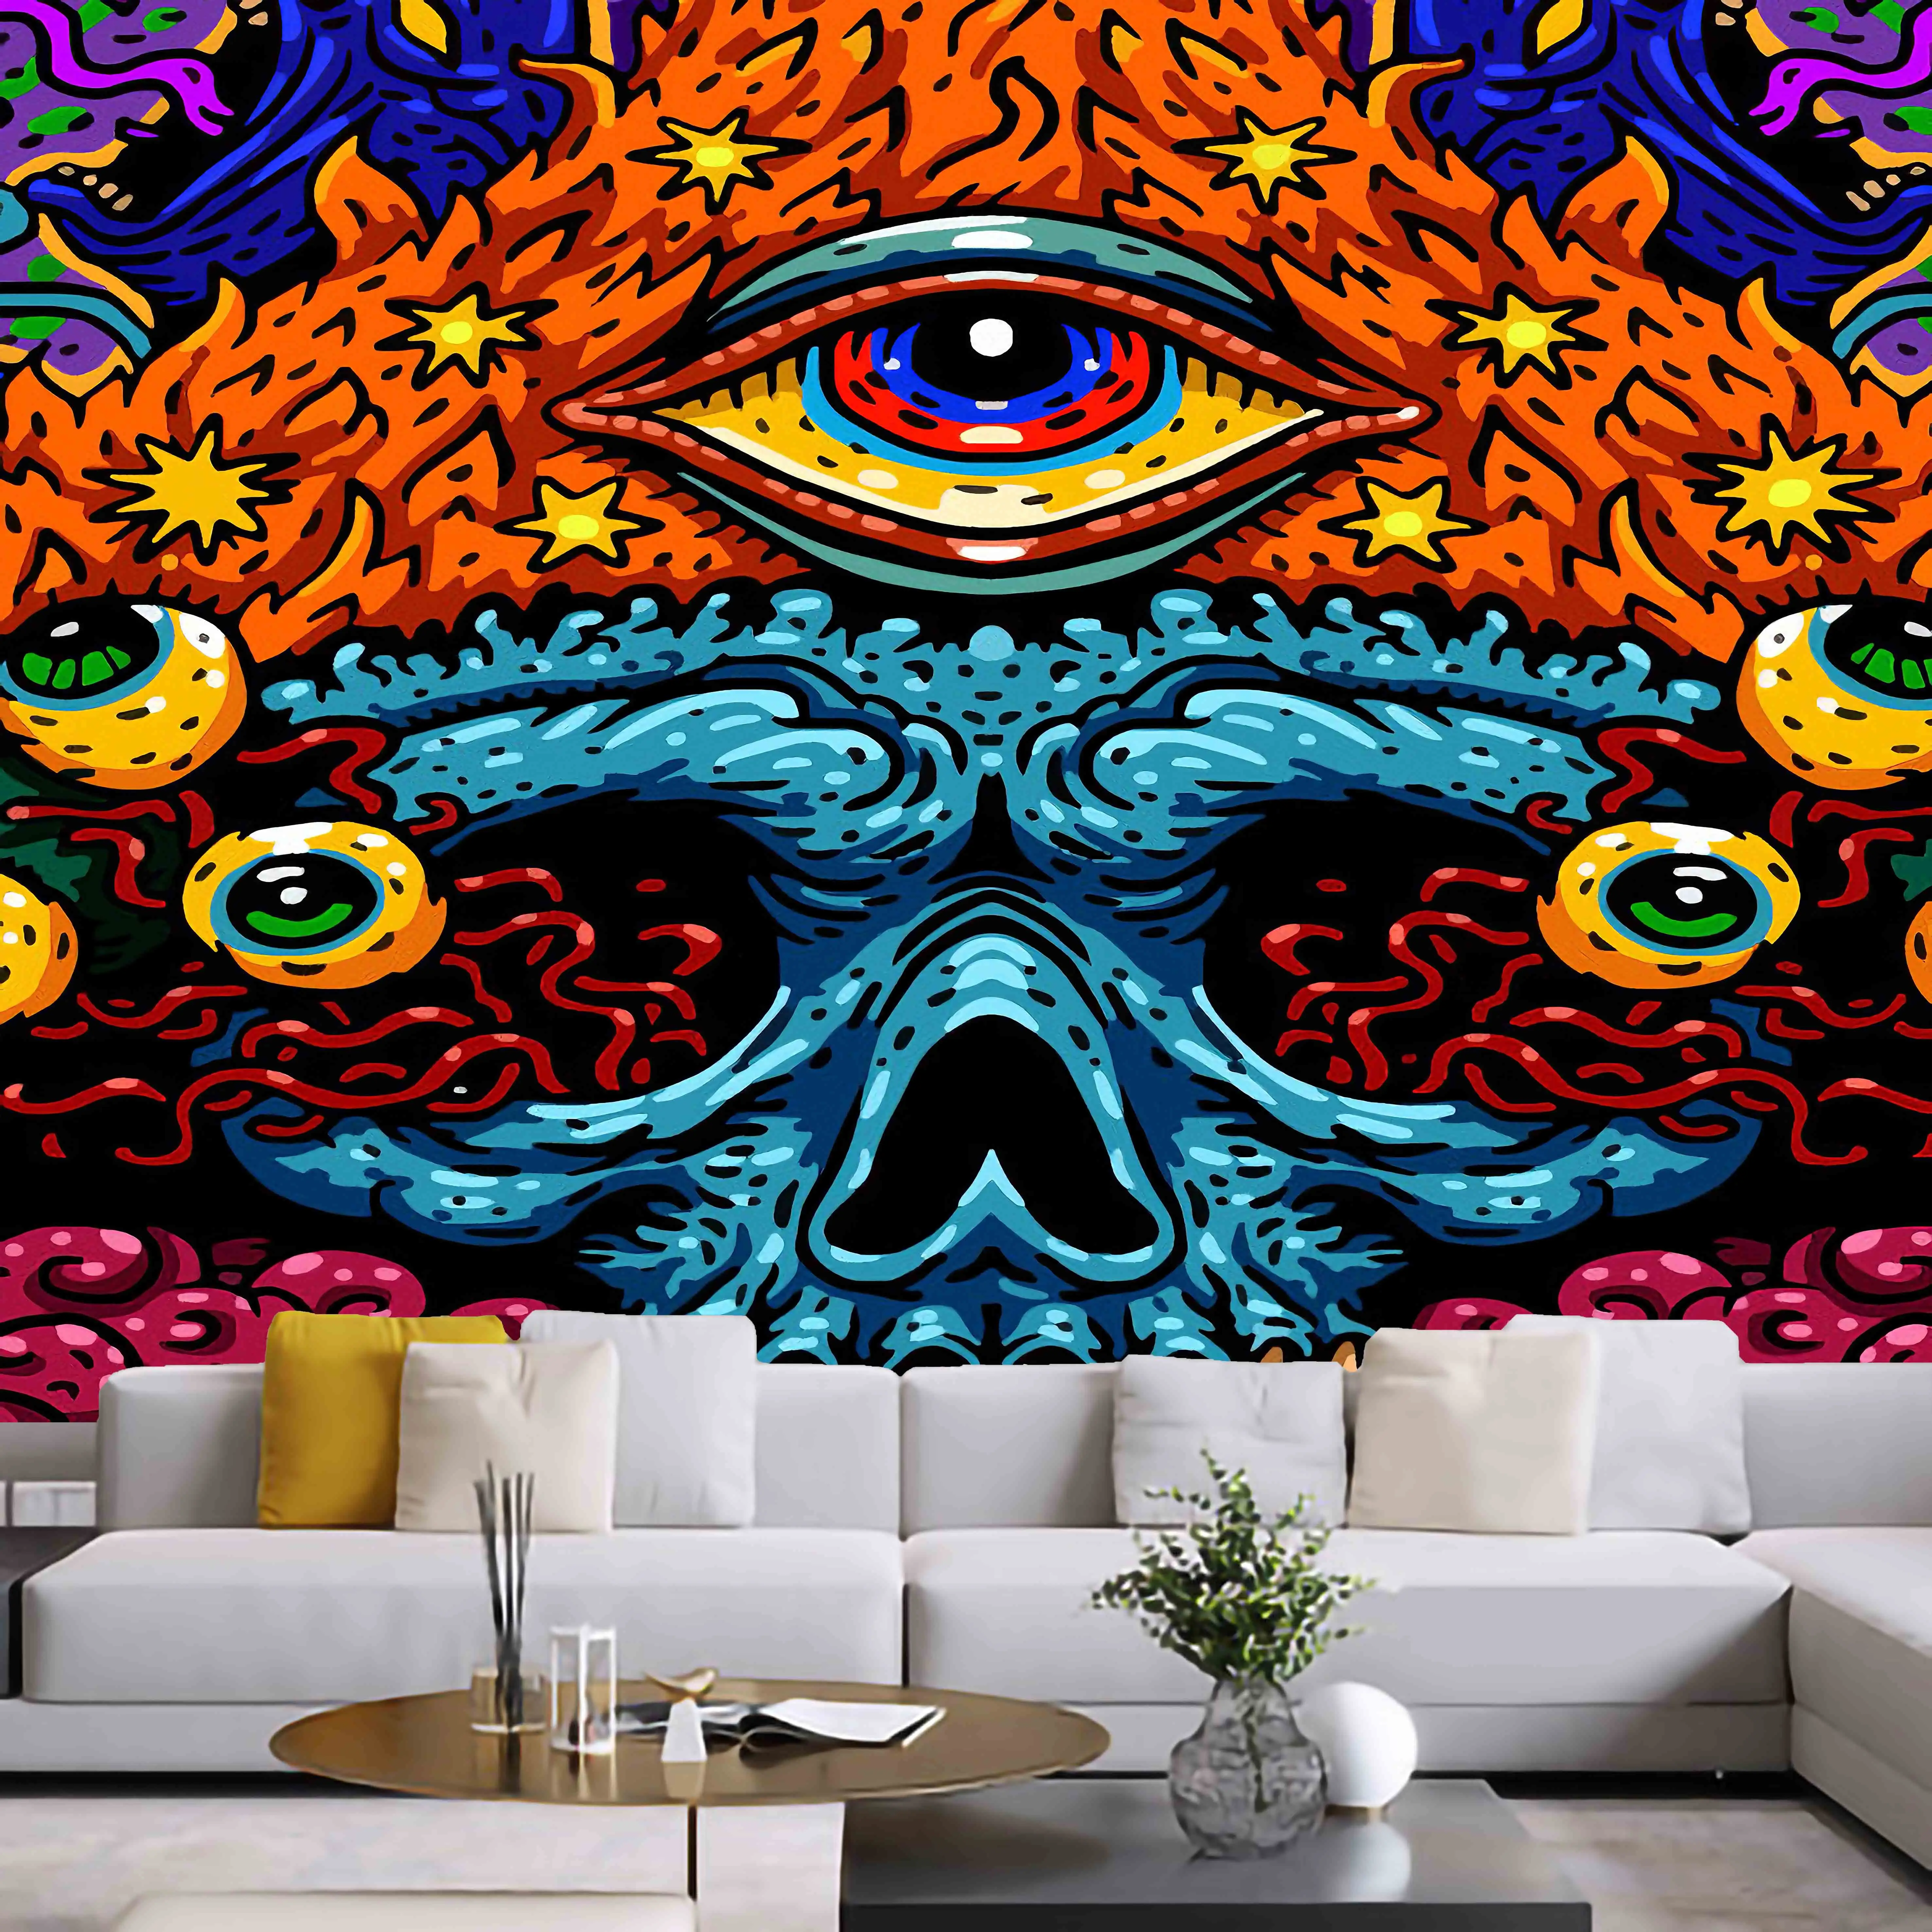 

Psychedelic Tapestry Mandala macrame hippie Art Wall Hanging Tapestries for Living Room Home Dorm Decor